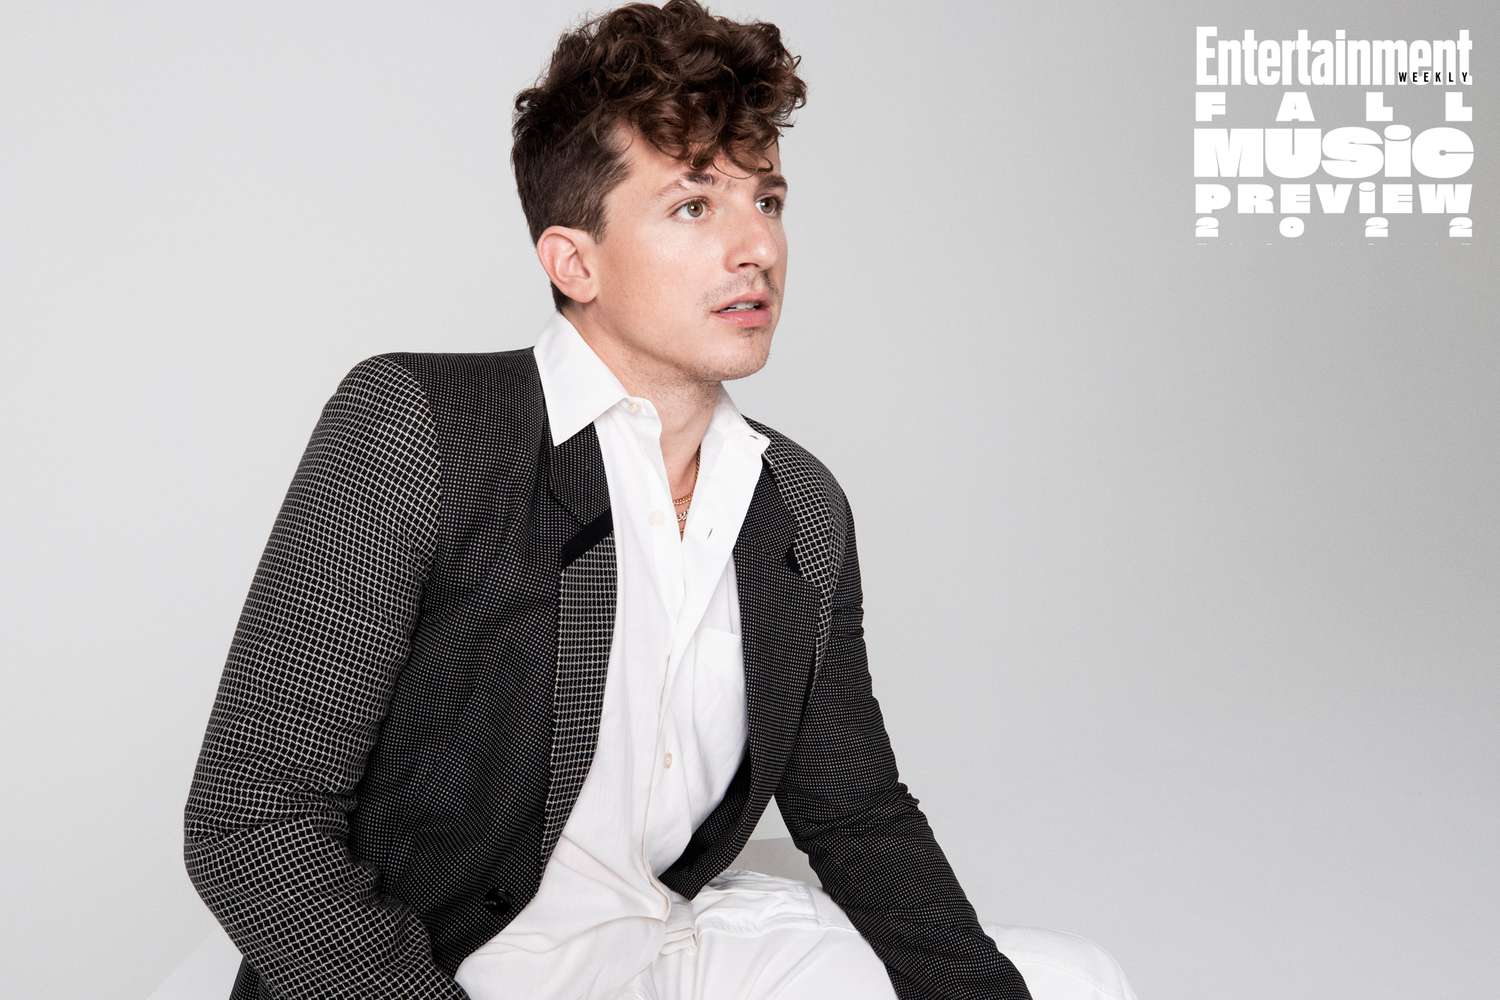 Charlie Puth is ready to reintroduce himself to the world